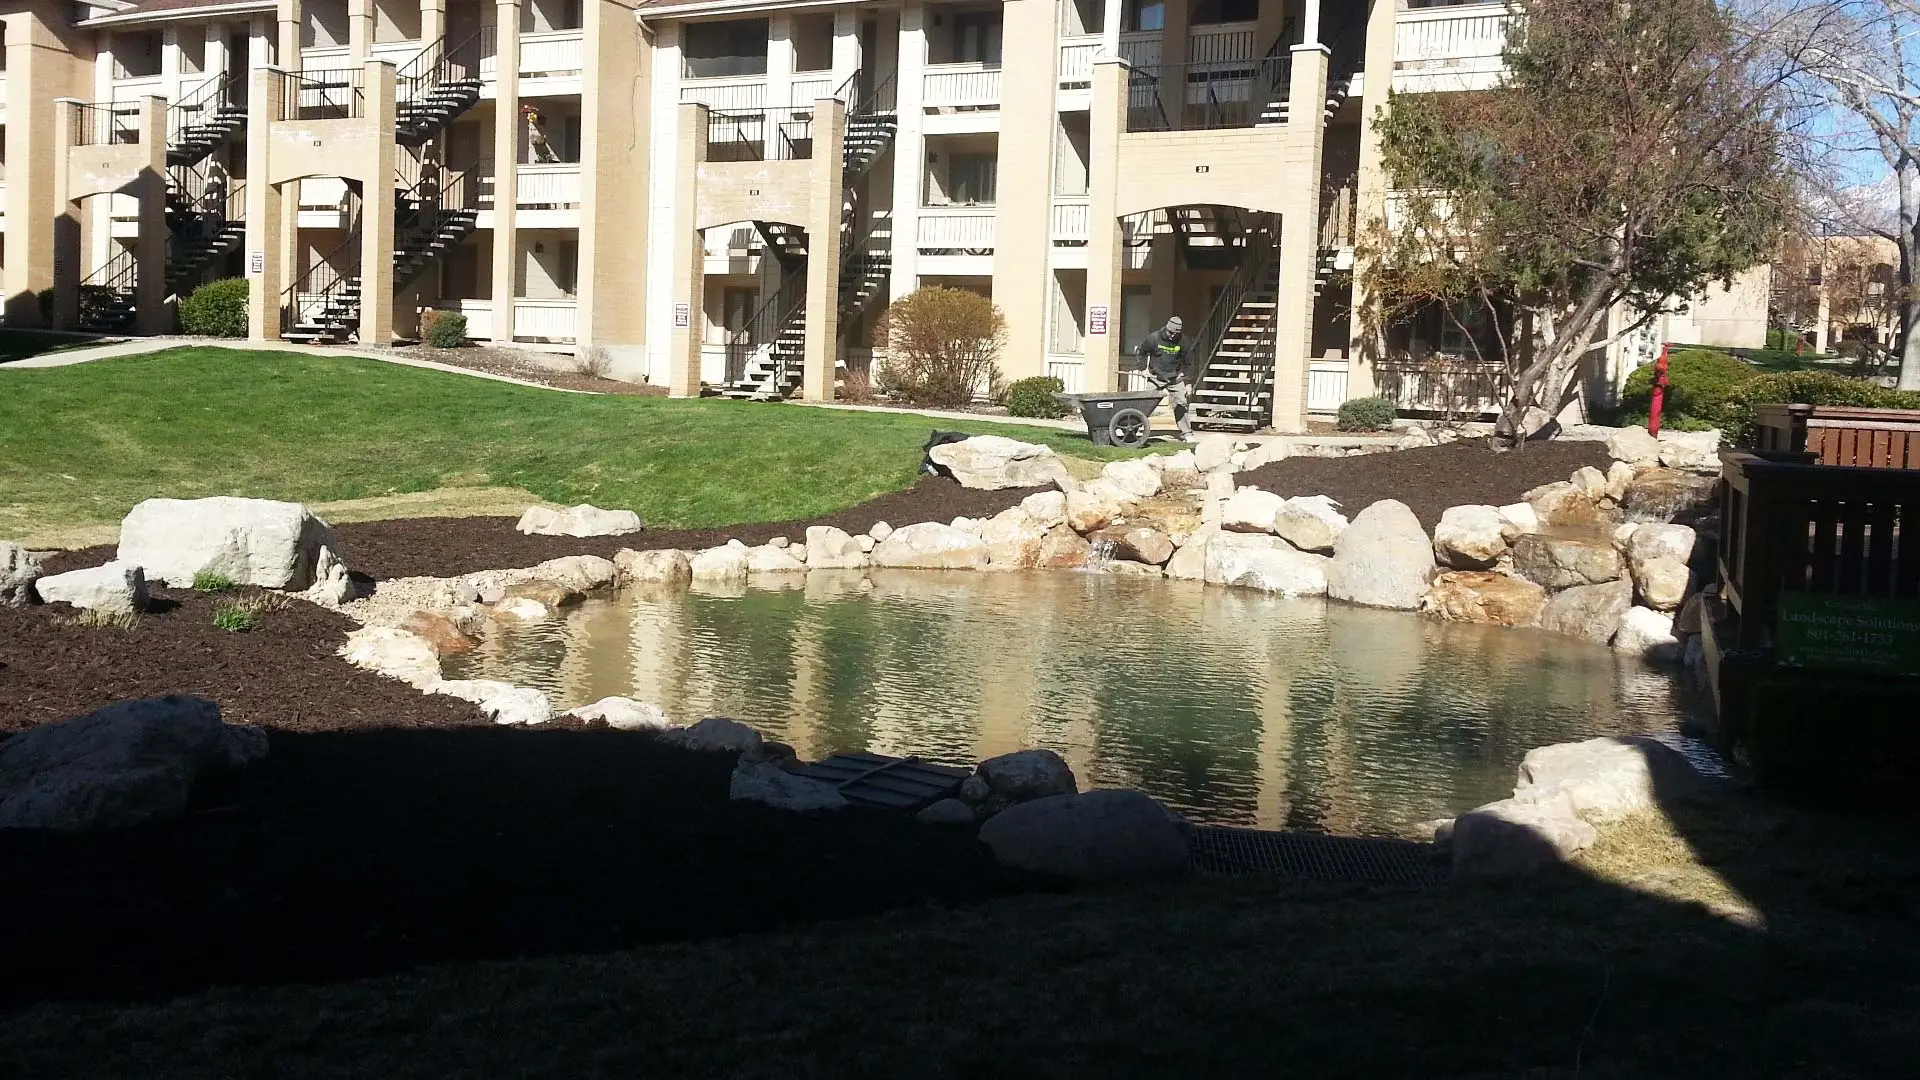 Landscaping around a pond at an apartment complex. 